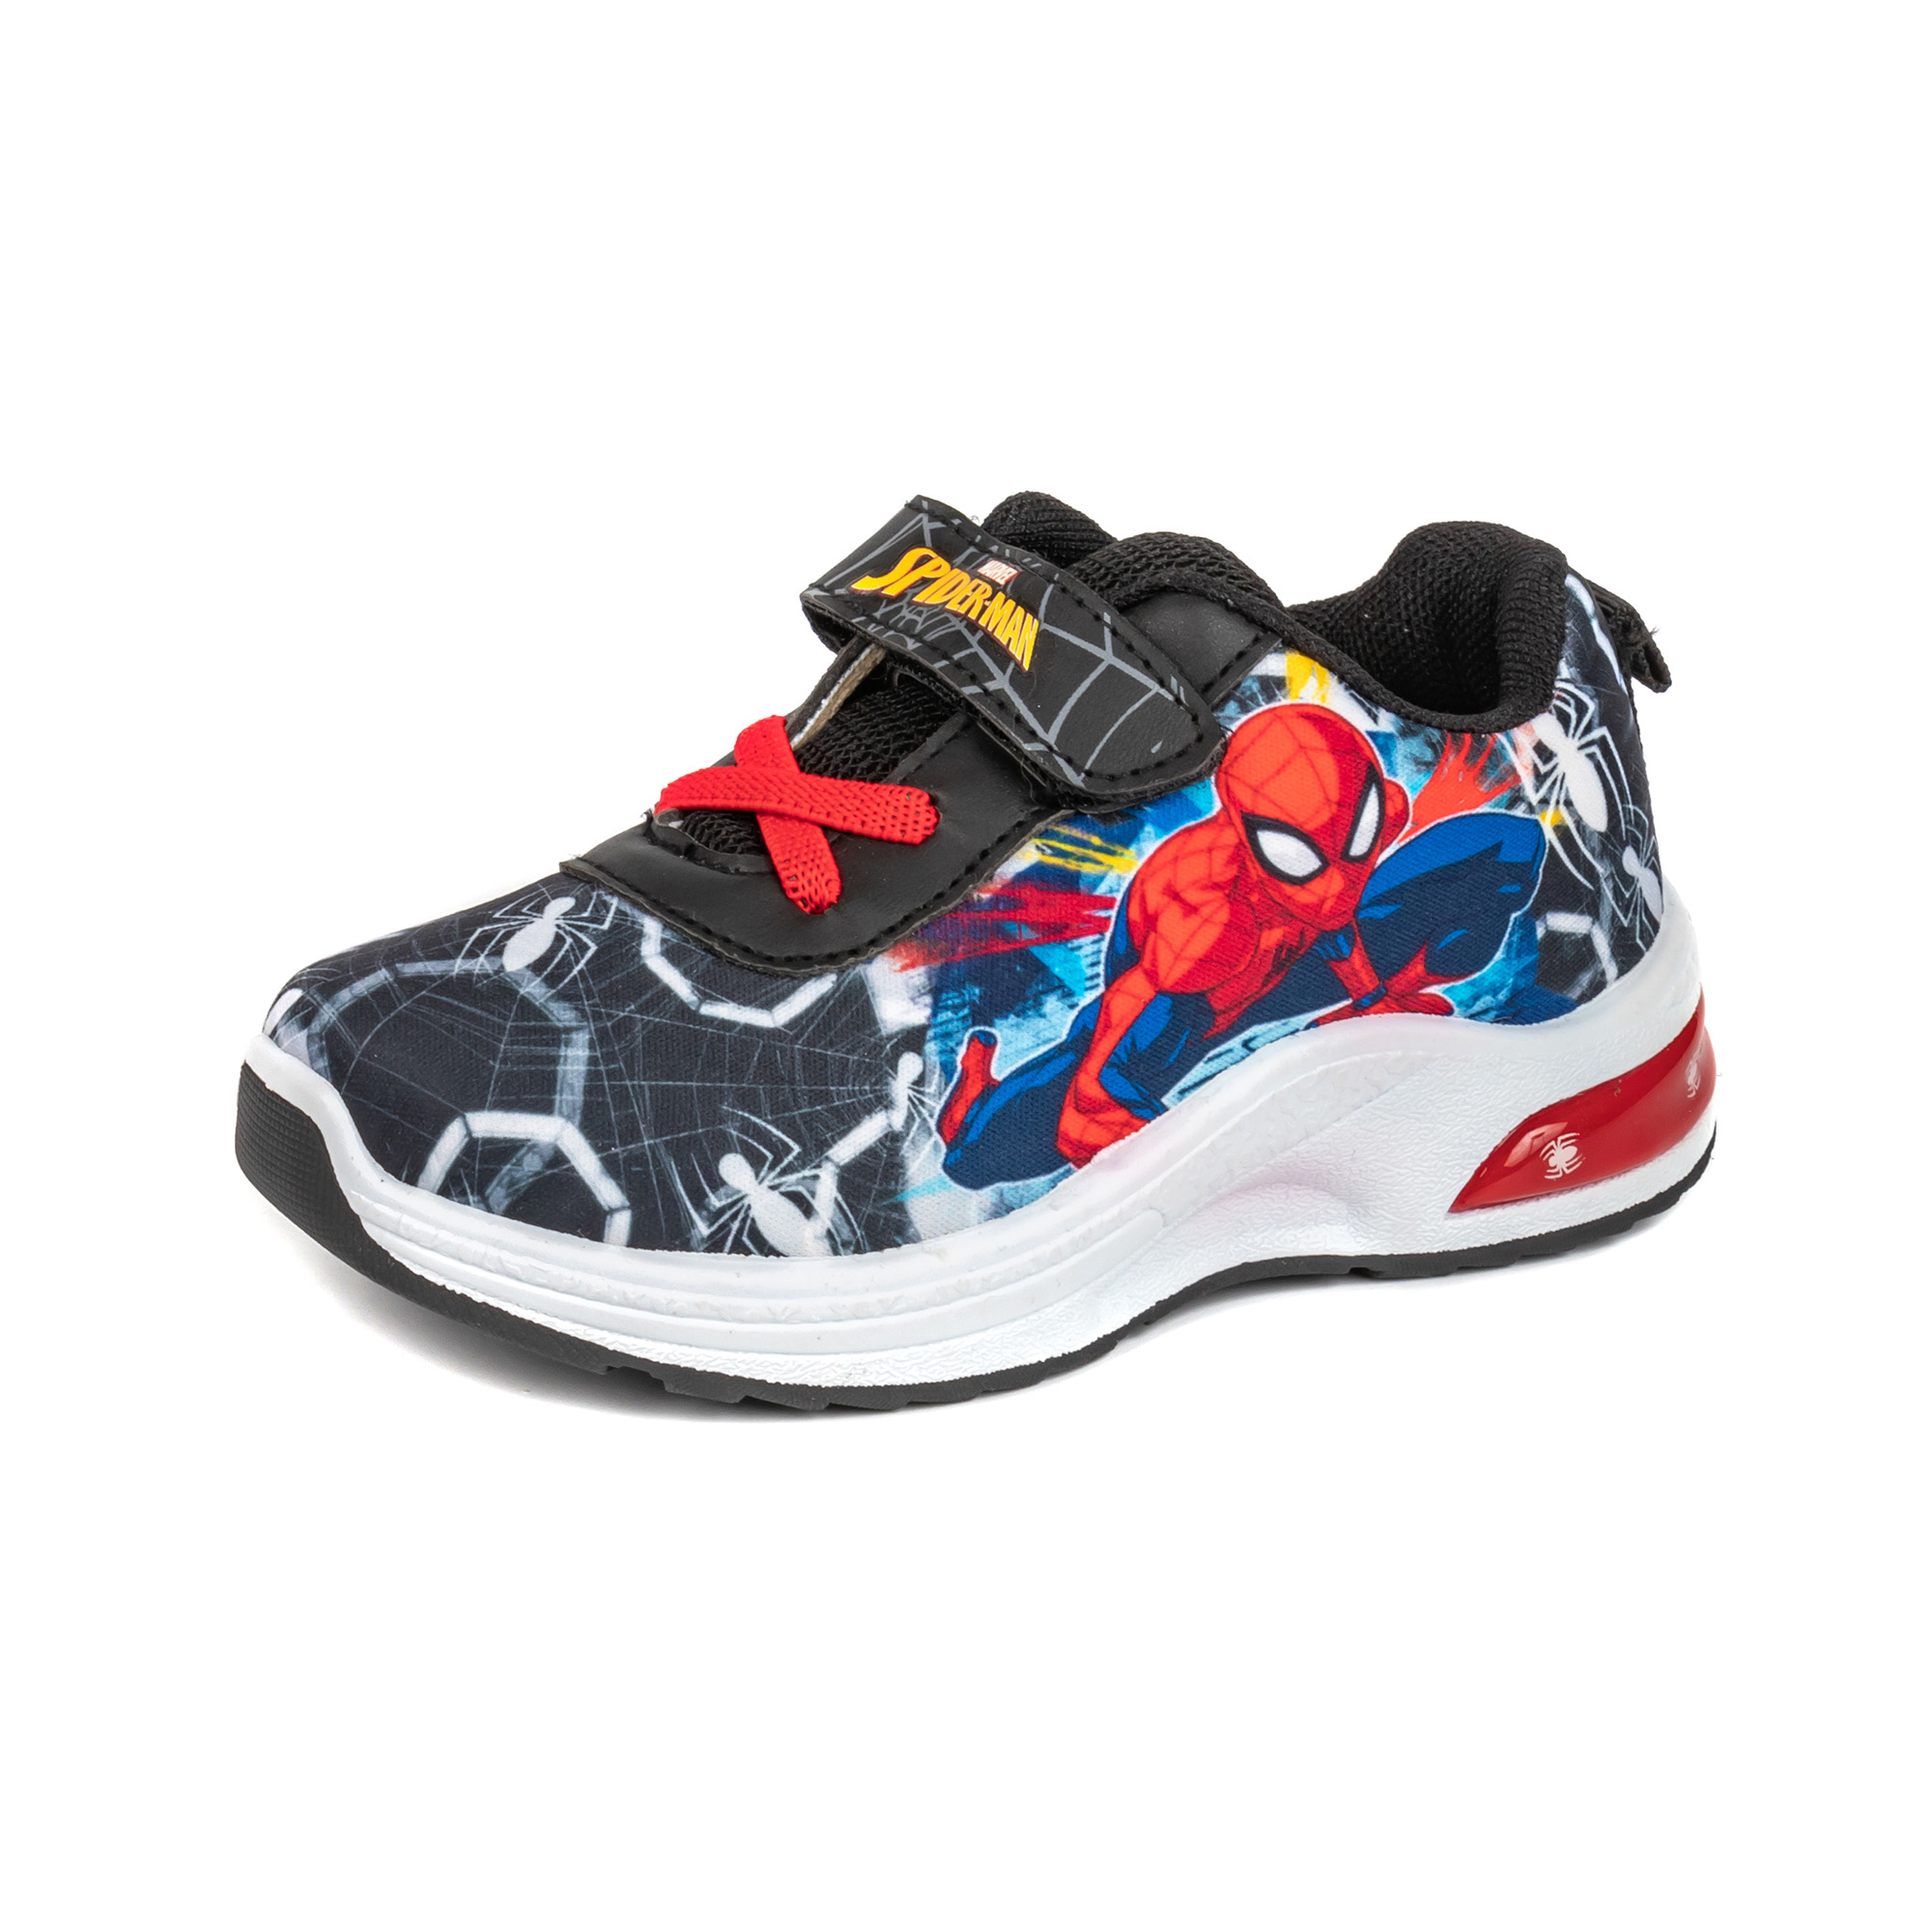 Sneaker Shoes, Children Shoes ,Injection shoes ,Black Textile with sublimation printing +Pu Upper, PVC injection Outsole